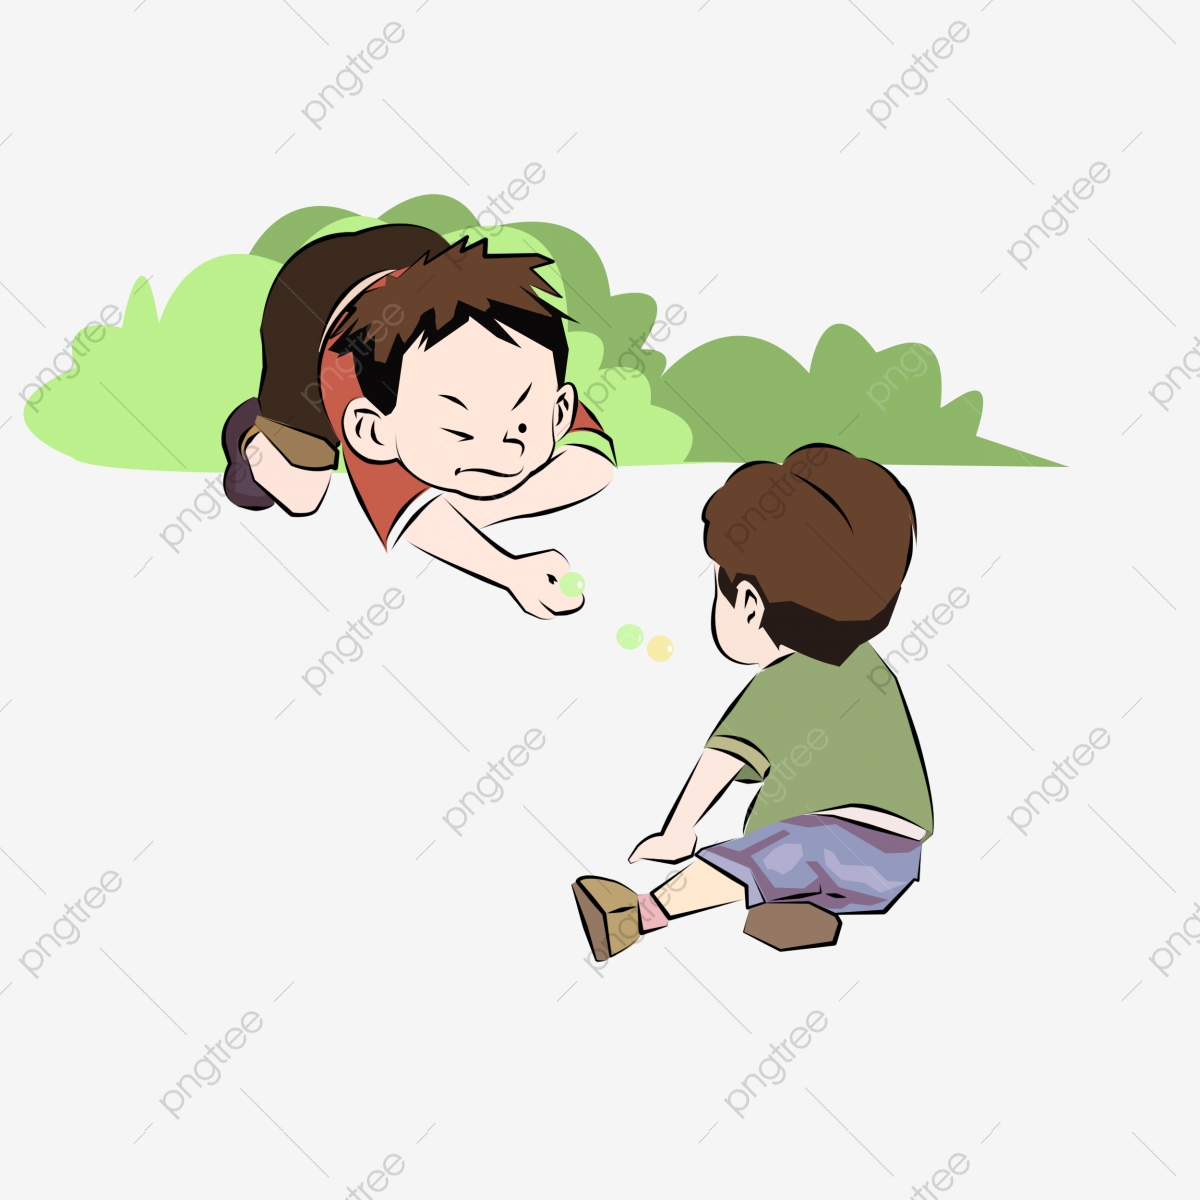 games clipart childhood game